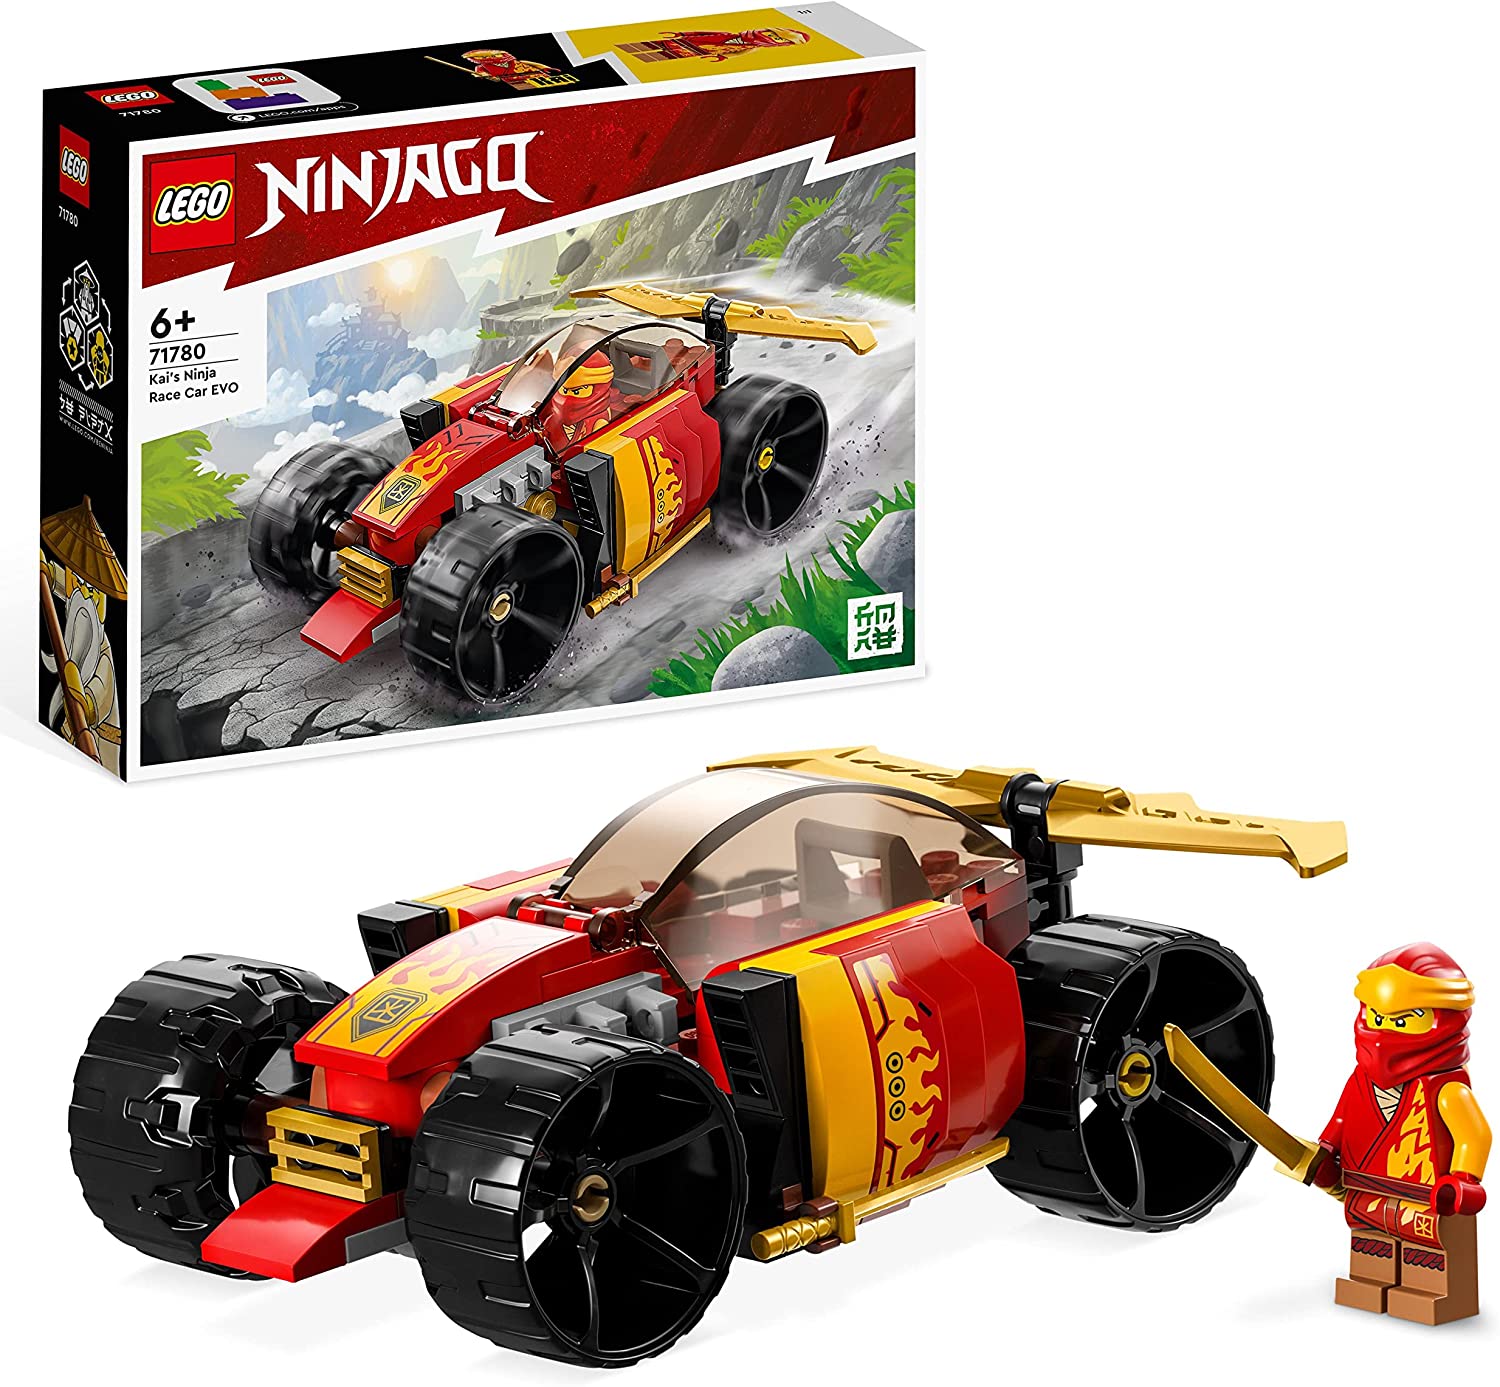 LEGO 71780 NINJAGO Kais Ninja Racing Car EVO 2-in-1 Racing Car Toy for Off-Road Vehicle, Model Kit for Boys and Girls from 6 Years, Birthday Gift Idea